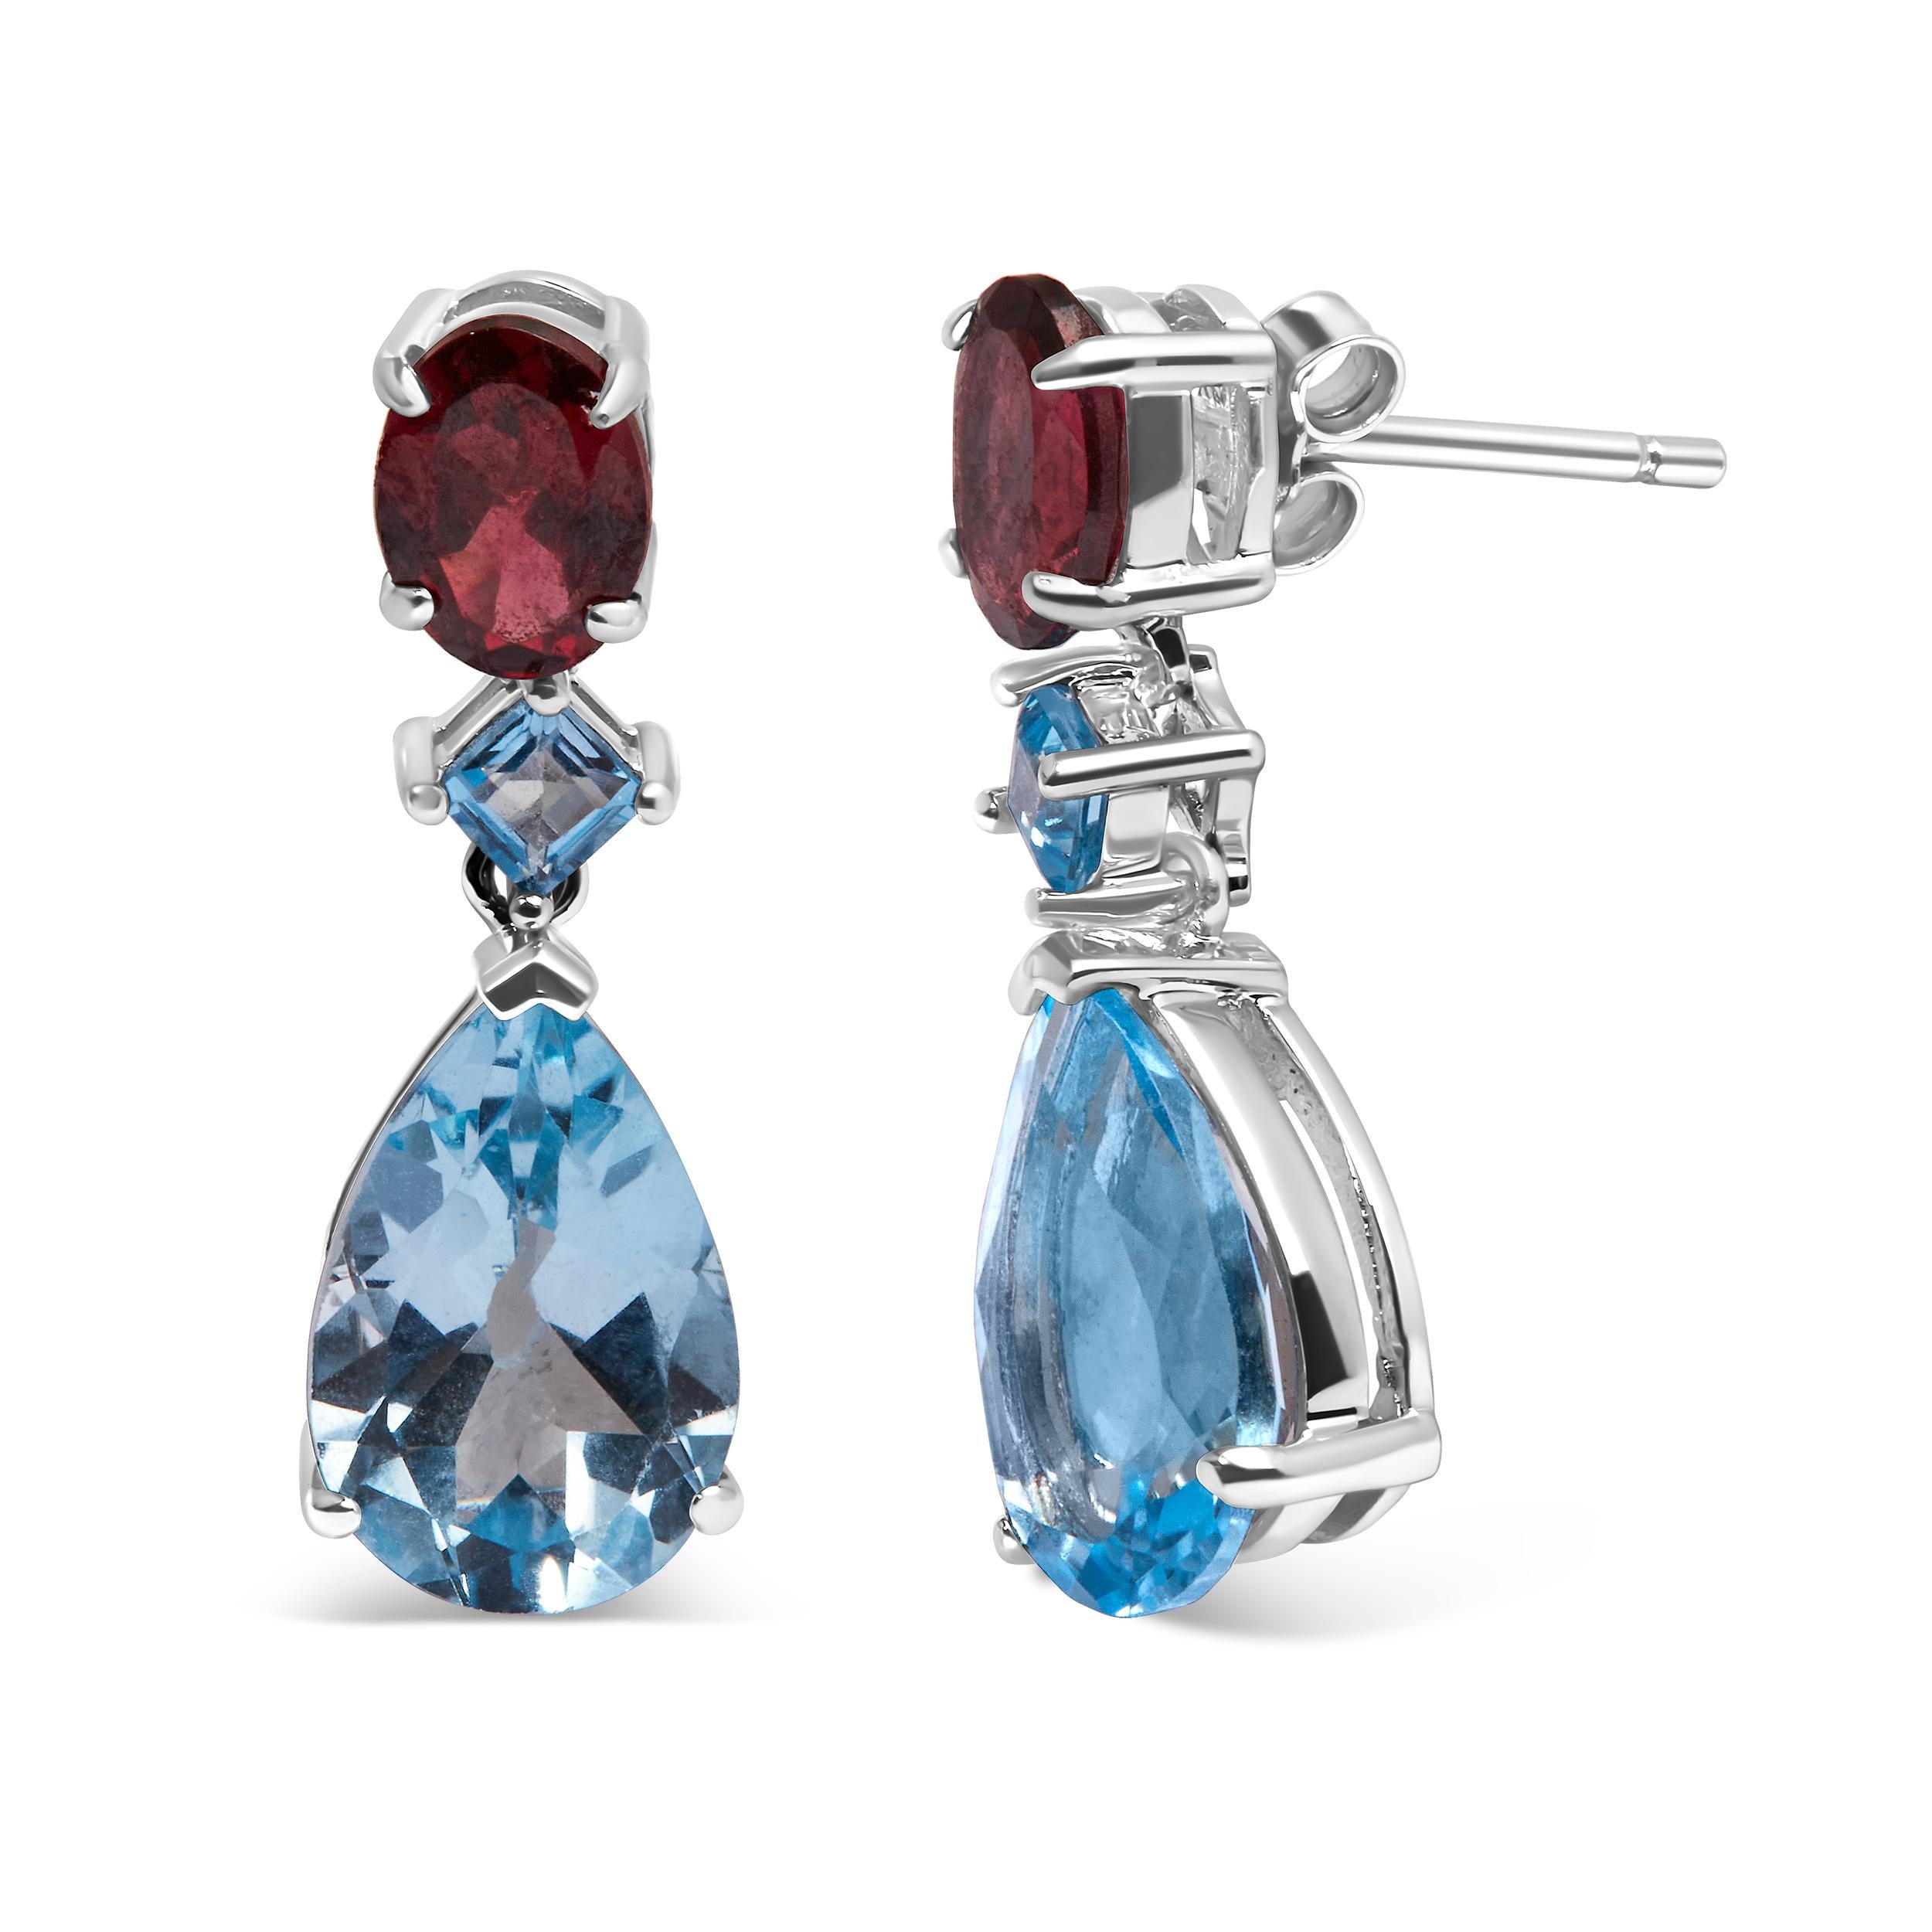 Indulge in the enchanting allure of these exquisite dangle drop earrings. Crafted with .925 sterling silver, these earrings showcase a mesmerizing 10.0 carat blue topaz and grape rhodolite garnet gemstone duo. The pear-shaped blue topaz, square blue